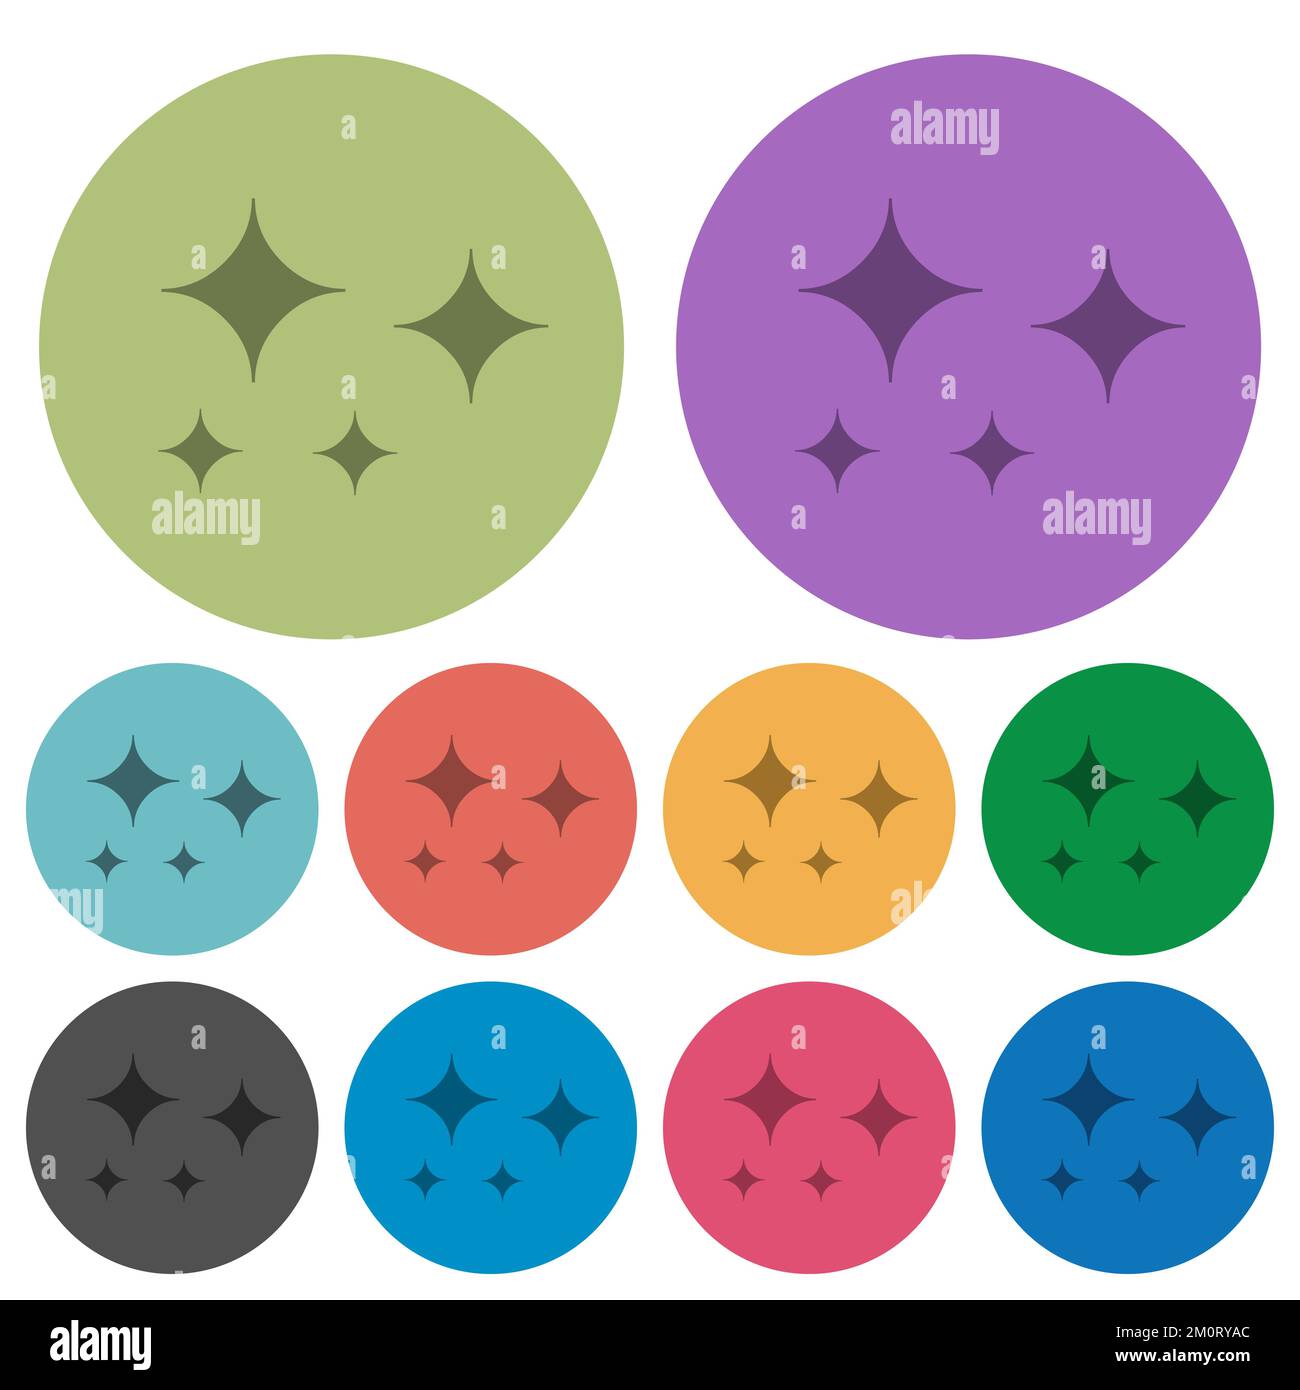 Glare stars solid darker flat icons on color round background Stock Vector